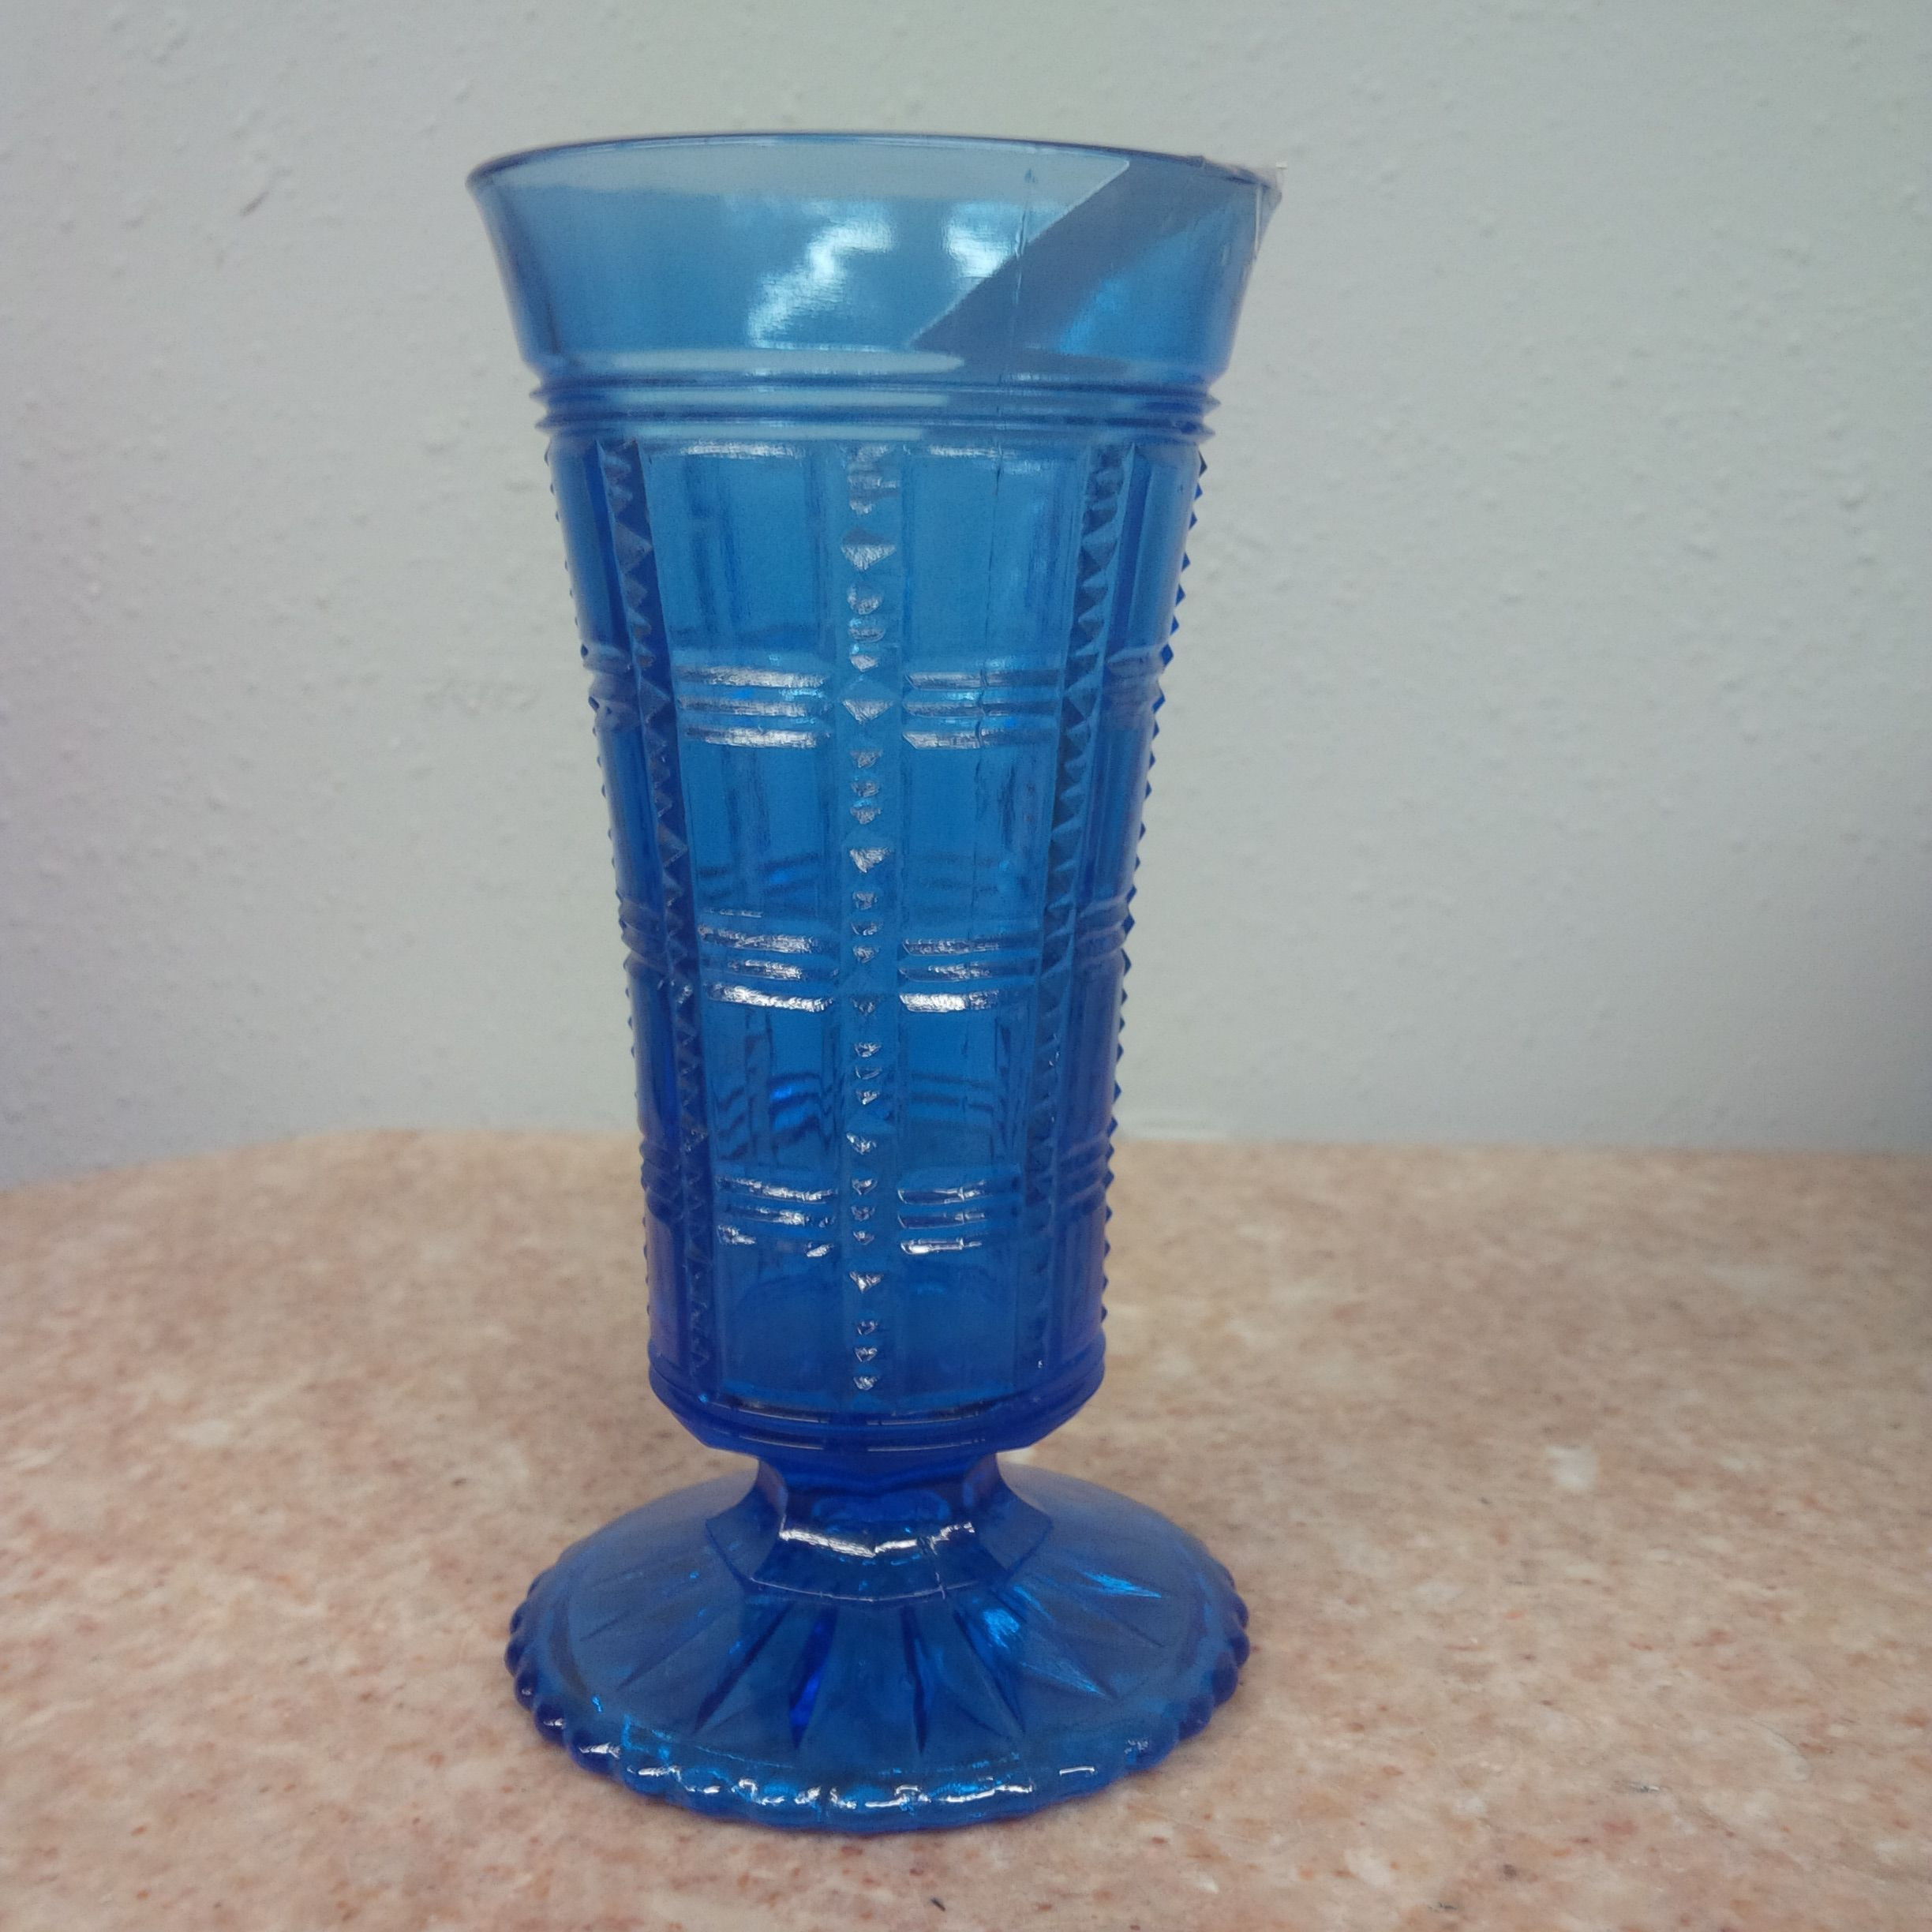 colored glass vases for centerpieces of 23 blue crystal vase the weekly world with regard to cobalt blue beaded block glass vase parfait by imperial glass co